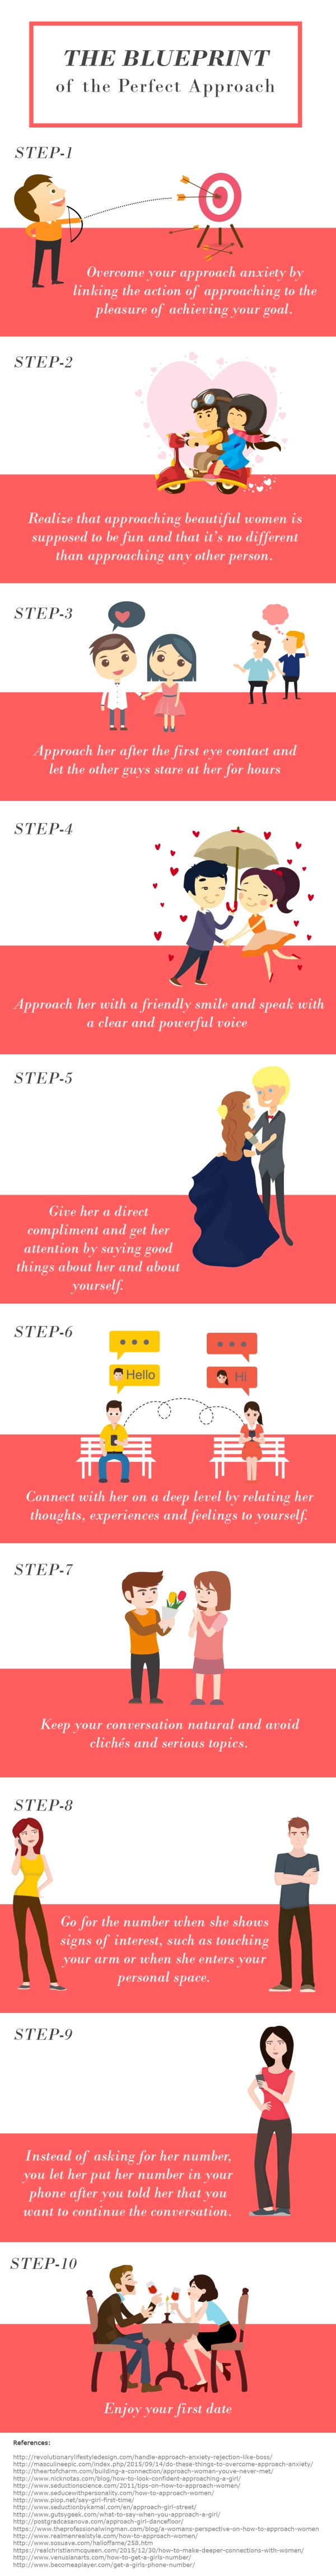 how to approach women infographic